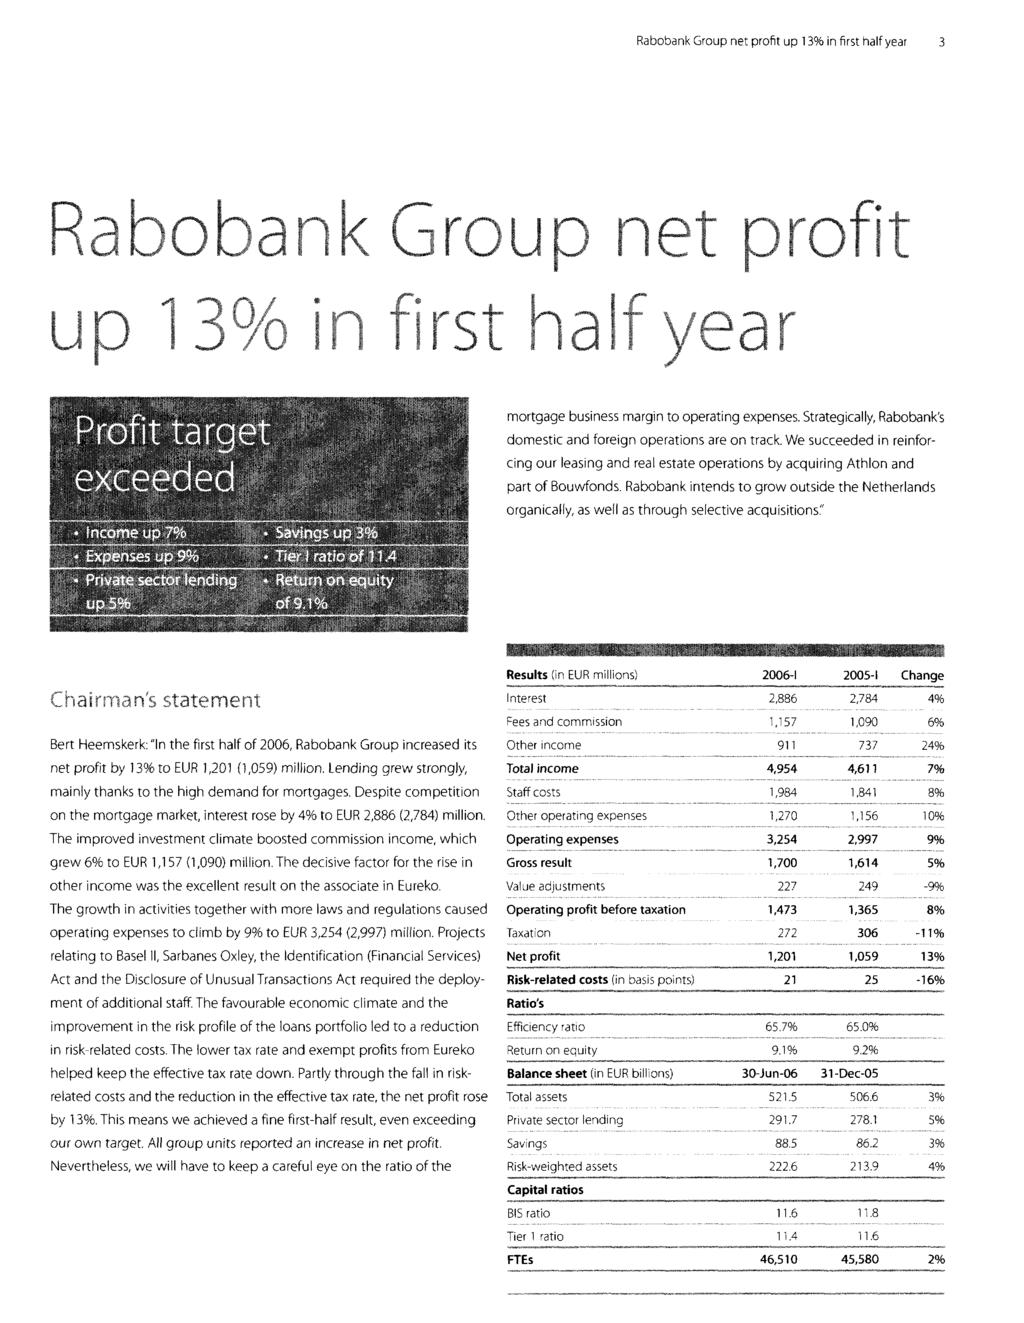 Rabobank Group net profit up 13% infirsthalf year 3 R a b o b a n k G r o u p n e t p r o f i t up 13% in first half year Profit t a r g e t - e x c e e d e d Income up 7% Expenses up 9% Private